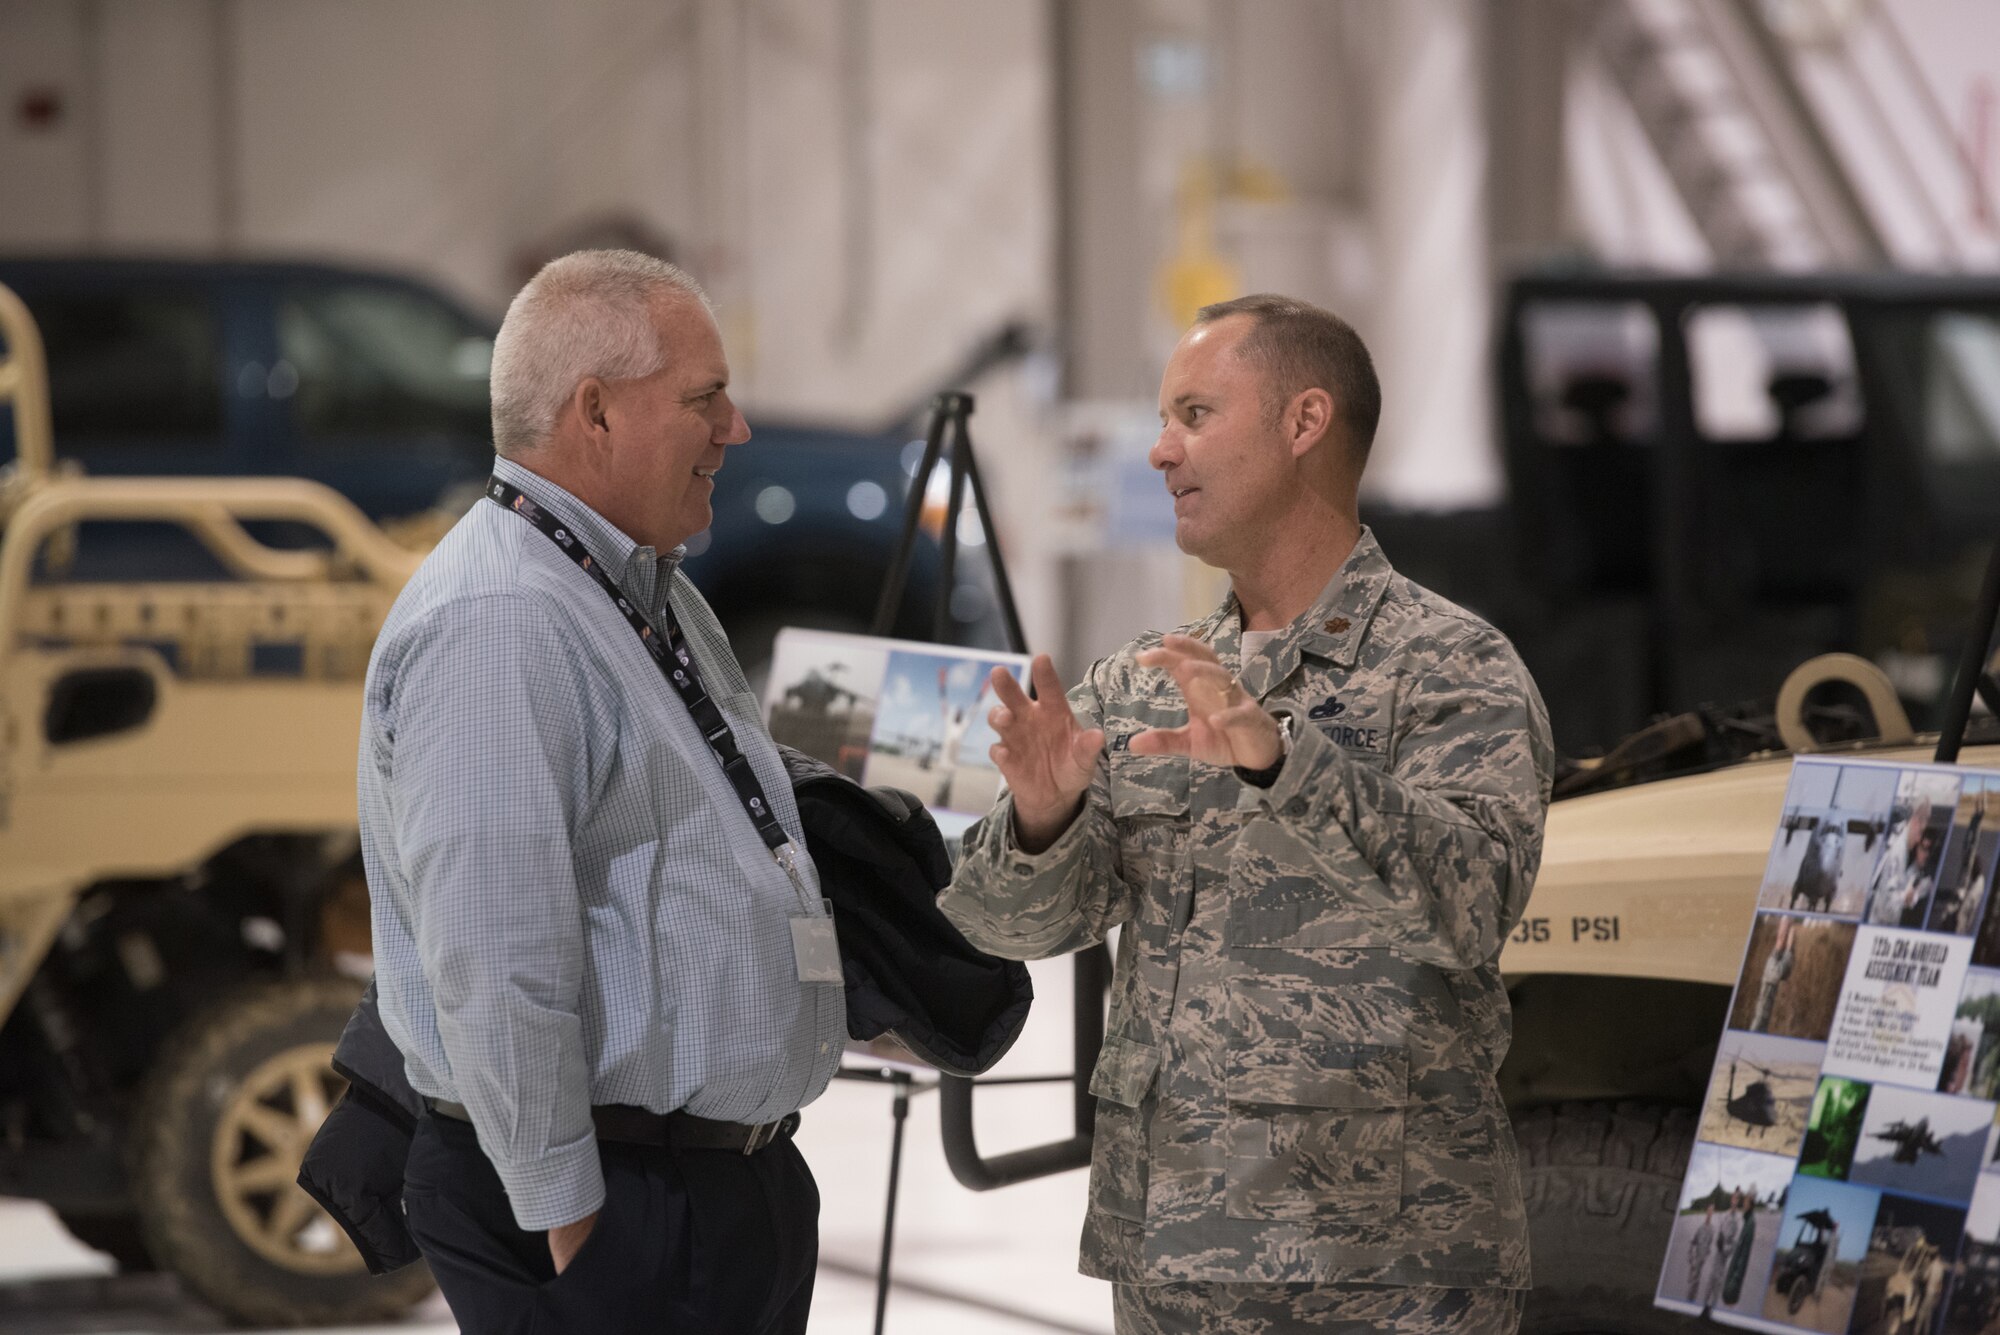 Maj. James Embry, director of operations for the 123rd Global Mobility Squadron, explains contingency response operations to Ivan Wood, global tooling business leader for GE Aviation, during an Employer Support of the Guard and Reserve “Bosslift” at the Kentucky Air National Guard Base in Louisville, Ky., Oct. 26, 2016. The Bosslift gave civilian employers an opportunity to learn more about what their employees do when serving as reservists in the Kentucky Air National Guard. (U.S. Air National Guard photo by Master Sgt. Phil Speck)